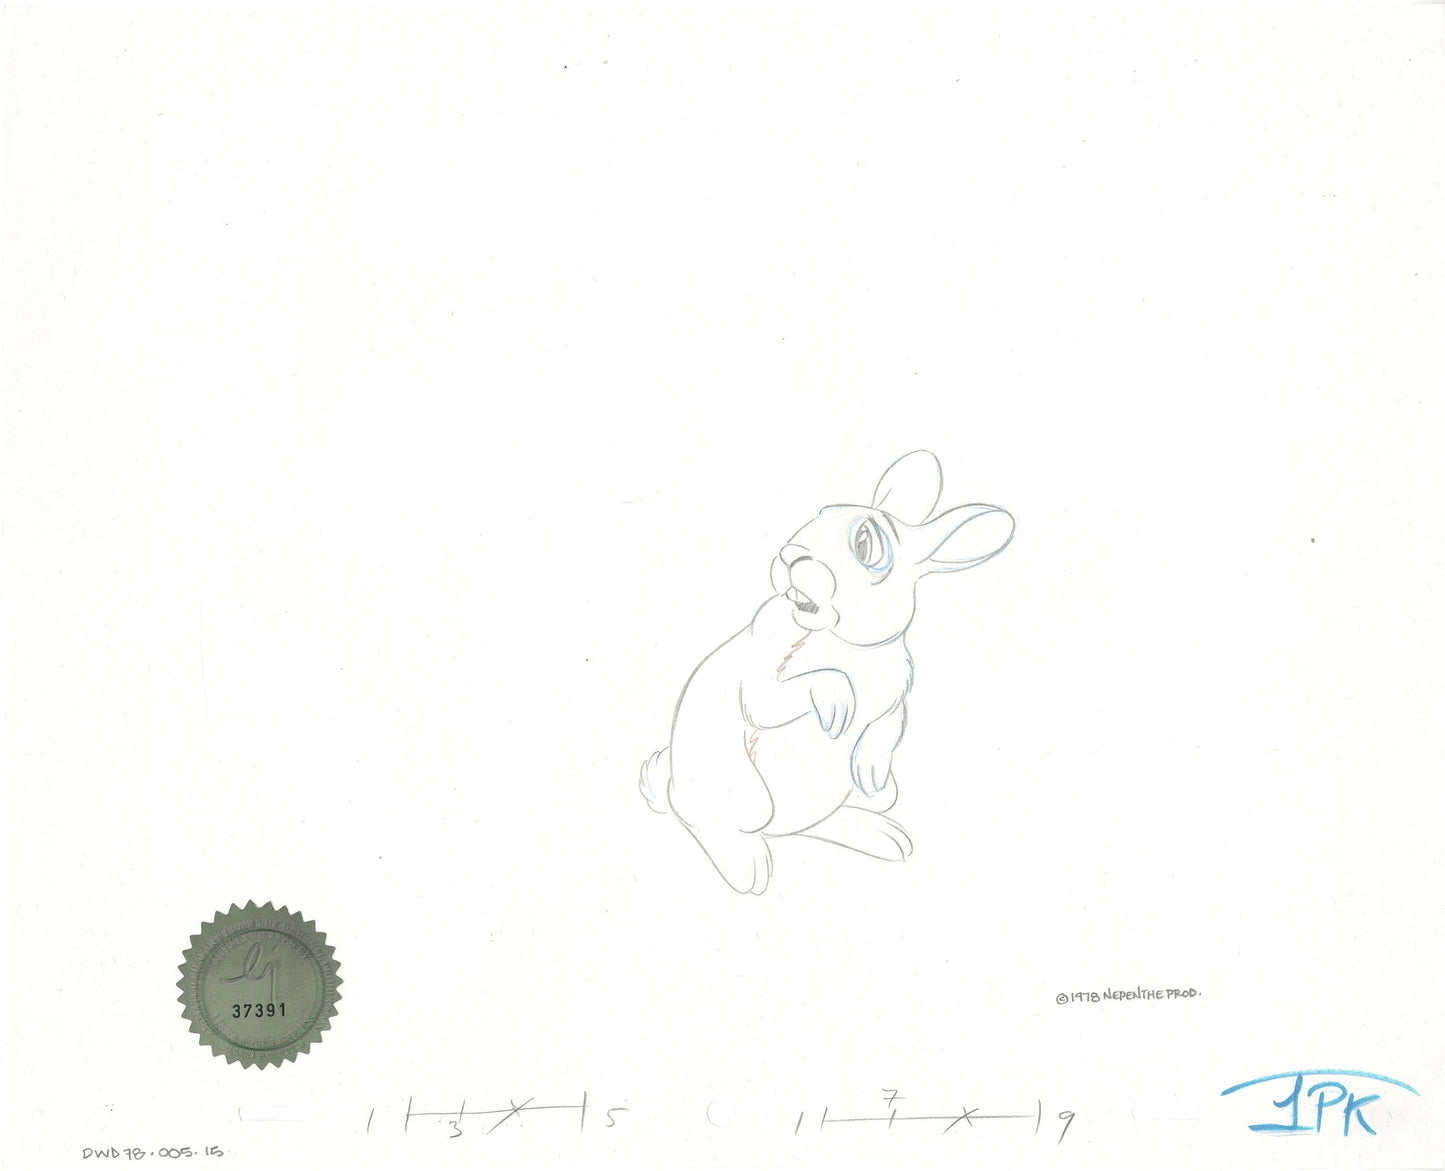 Watership Down 1978 Production Animation Cel Drawing with Linda Jones Enterprise Seal and Certificate of Authenticity 005-015